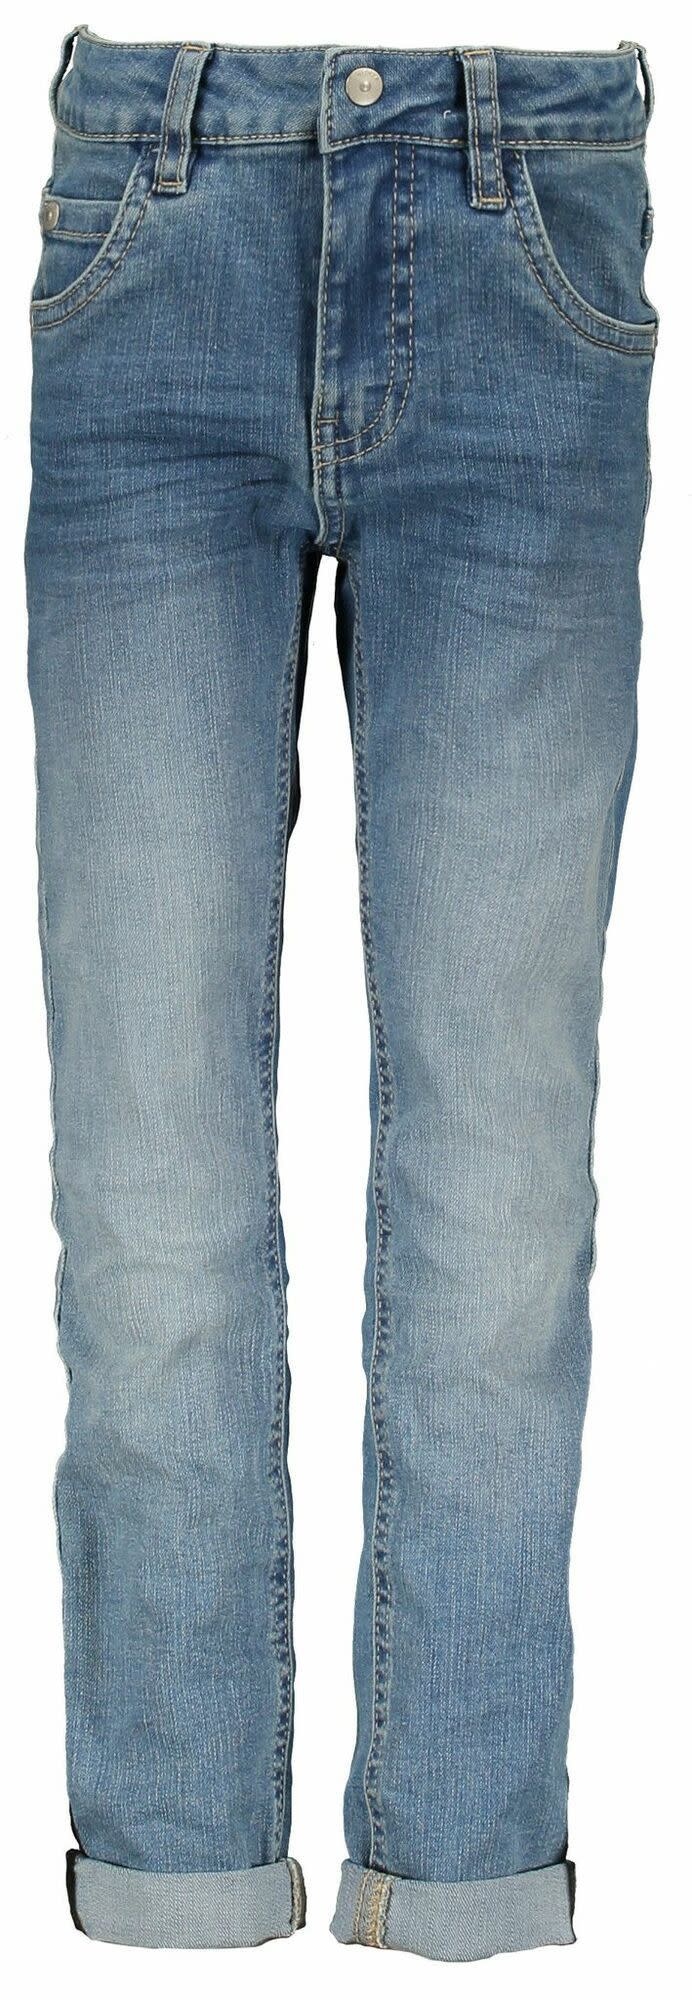 Stretch Jeans - Light Used